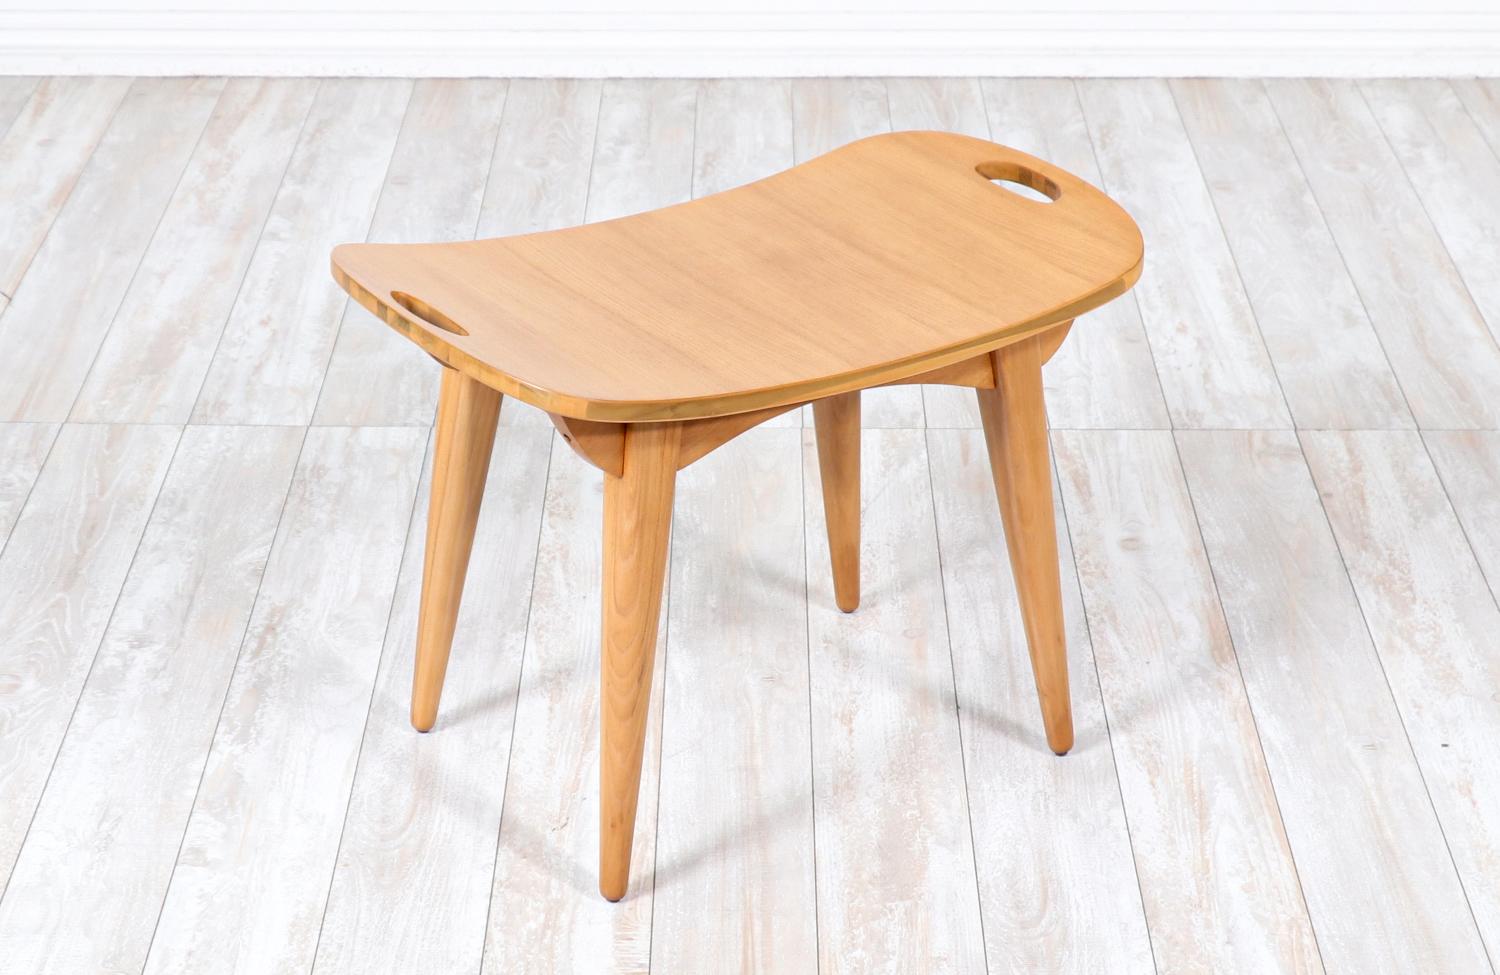 Mid-Century Modern Sculpted Primavera Wood Stool

________________________________________

Transforming a piece of Mid-Century Modern furniture is like bringing history back to life, and we take this journey with passion and precision. With over 17